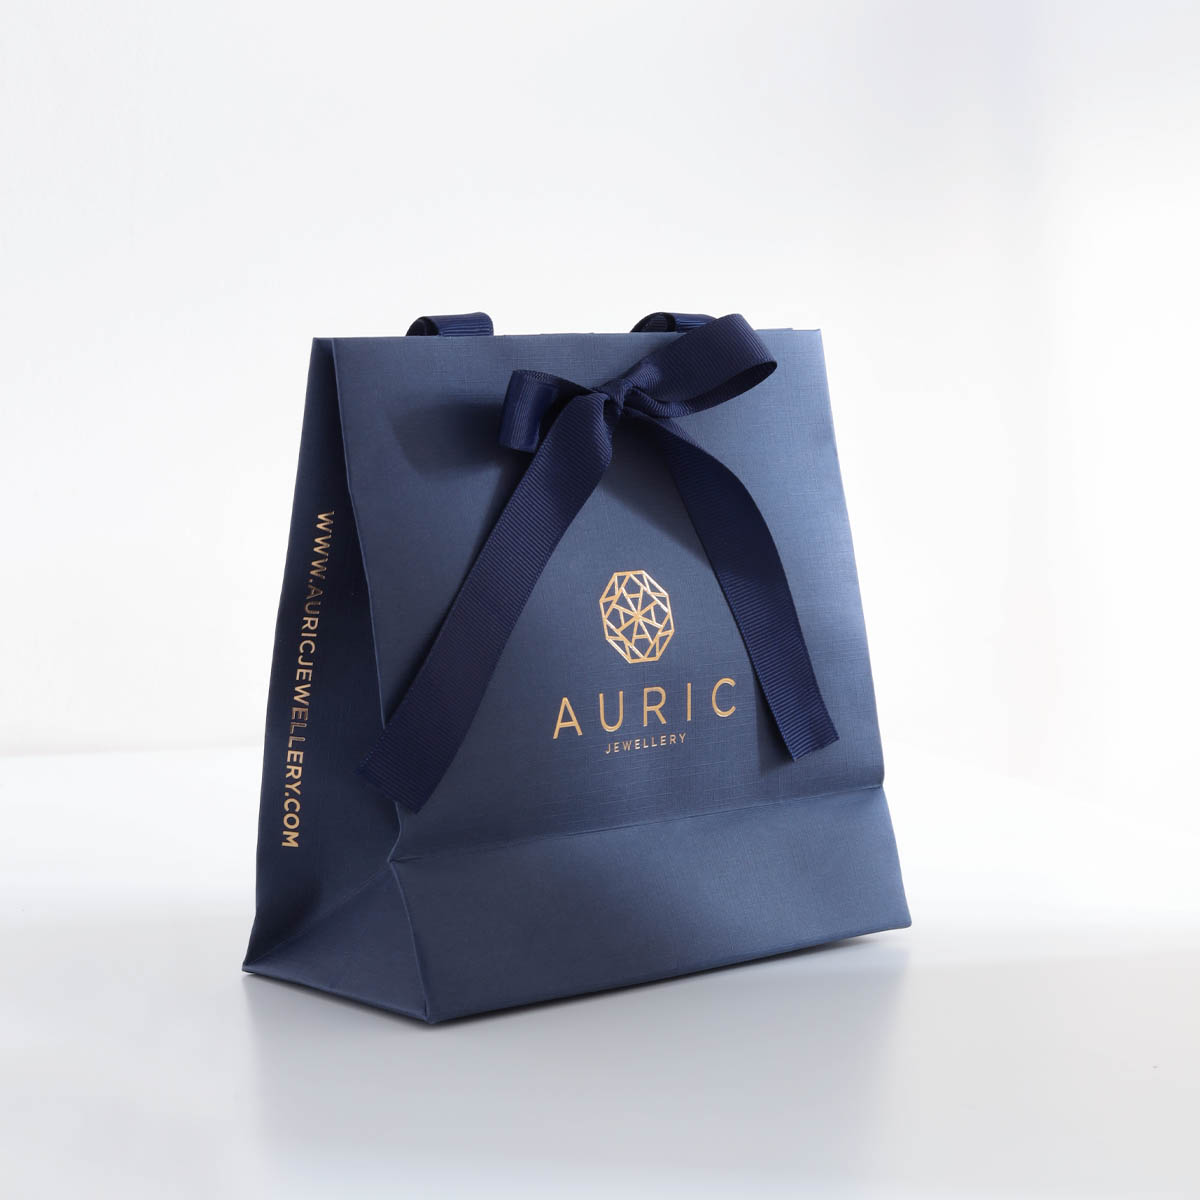 Auric-Jewellery-Signature-Packaging-